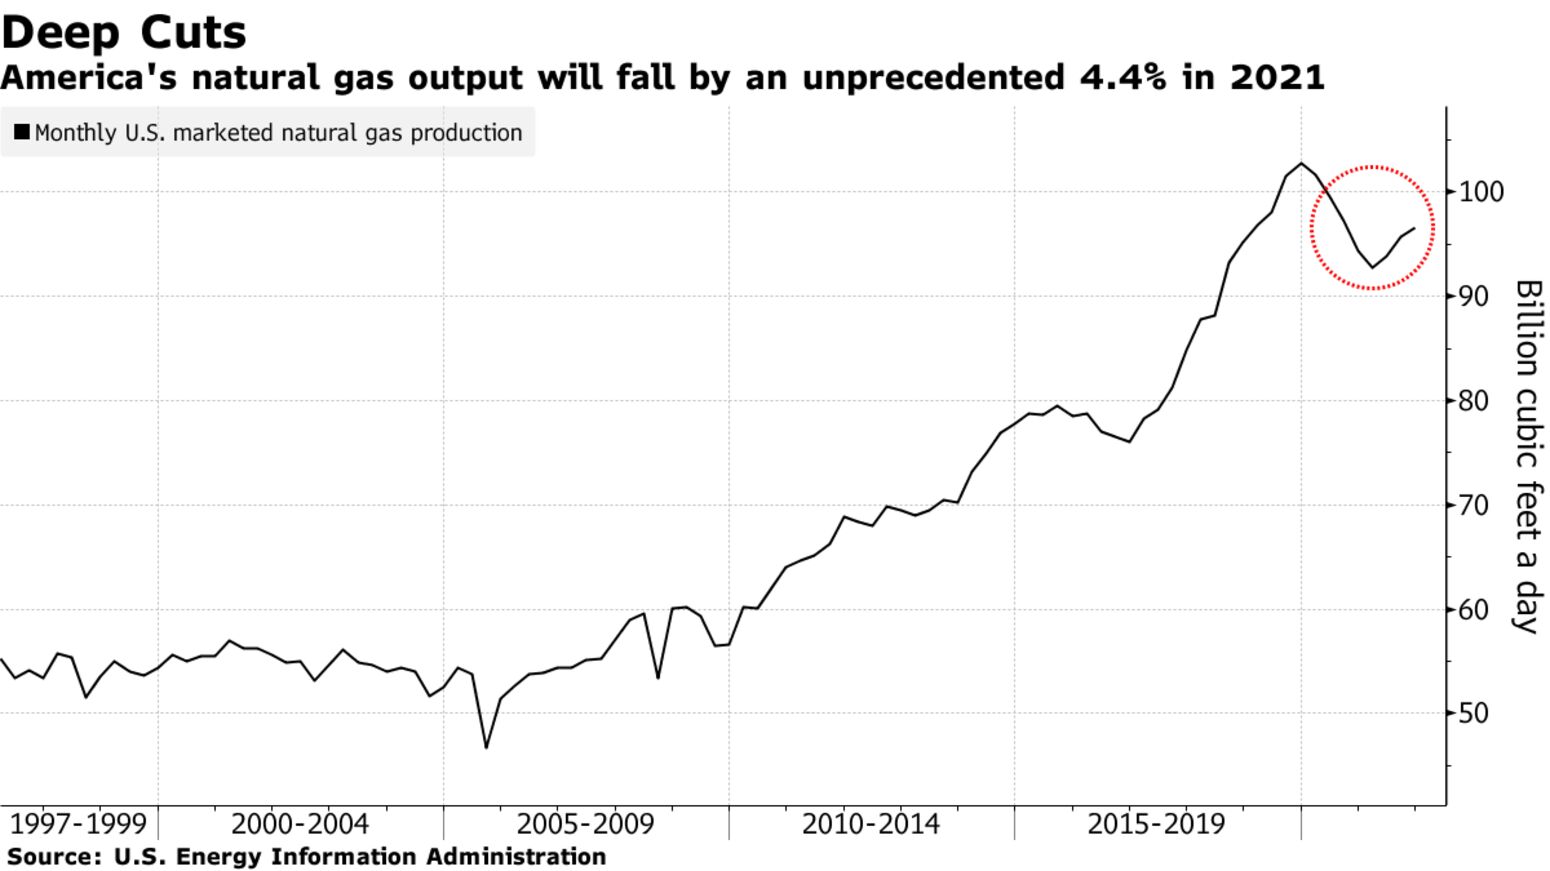 America's natural gas output will fall by an unprecedented 4.4% in 2021